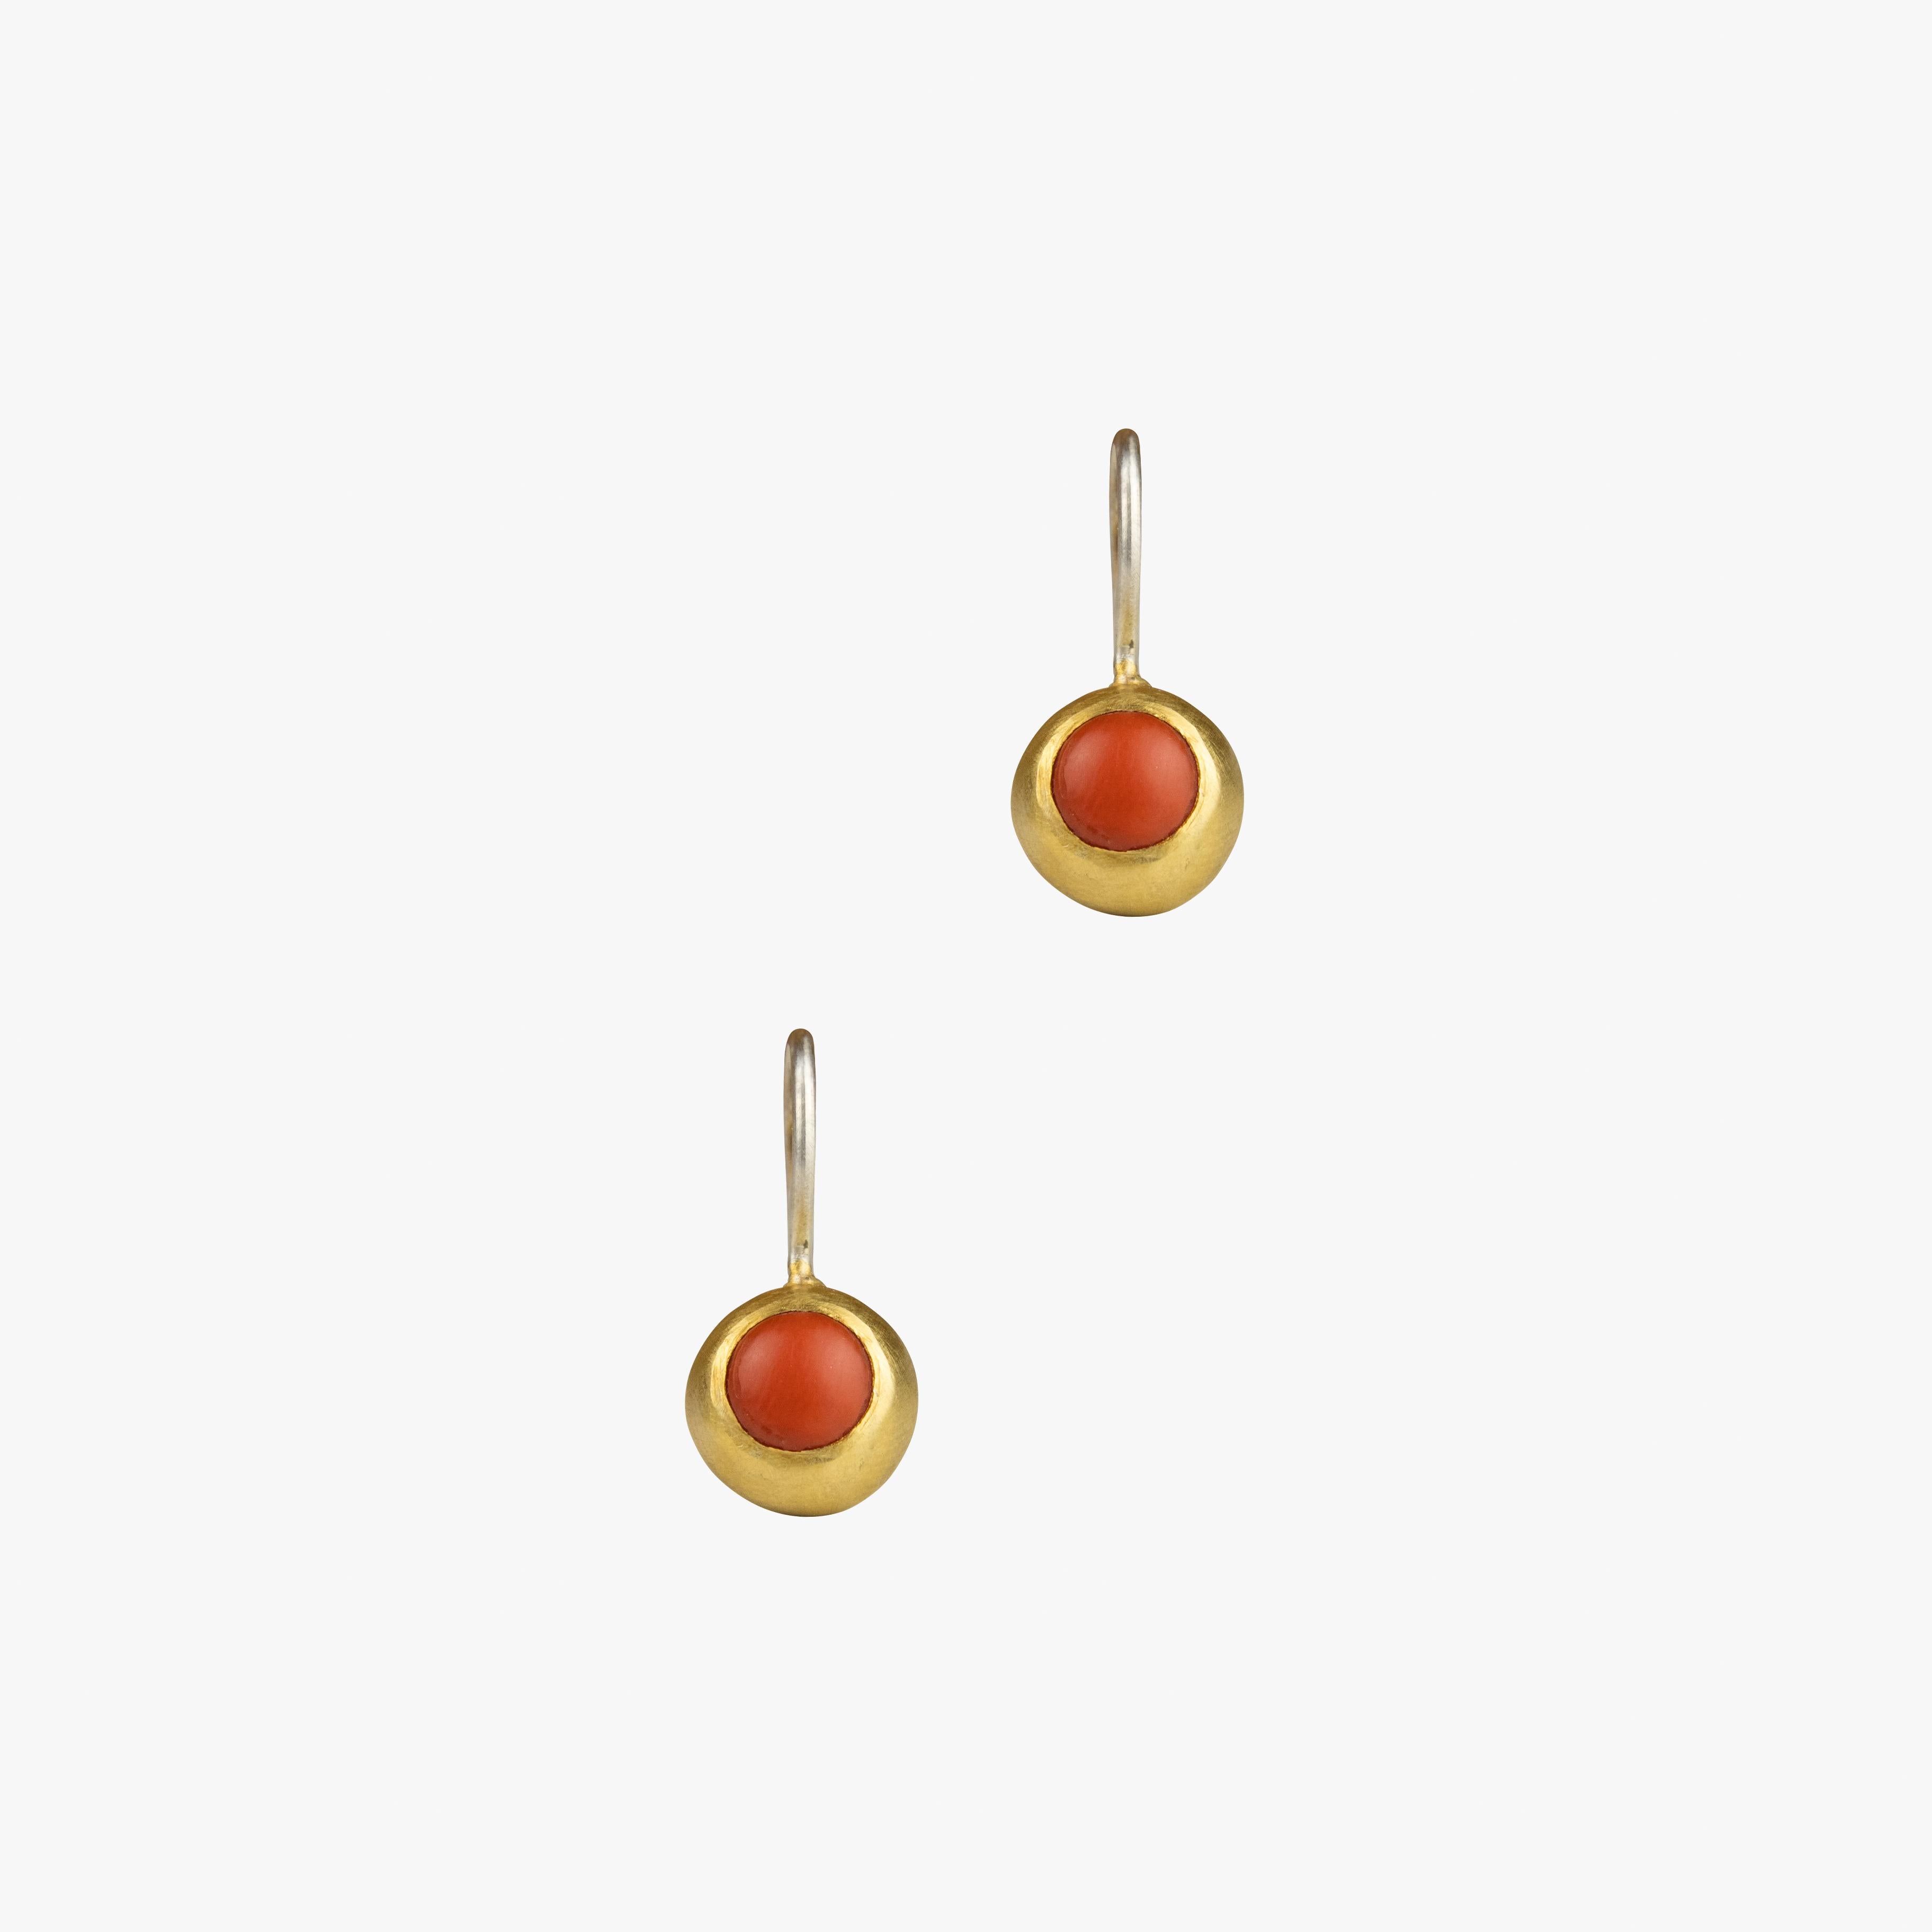 The gold plated Coral Earrings made from Sterling Silver are part of the Coral Classics and symbolize the vibrant and high quality designs of Monika Herré.

 

The curved earring splint smoothly glides around the ear and is worked into the matt gold